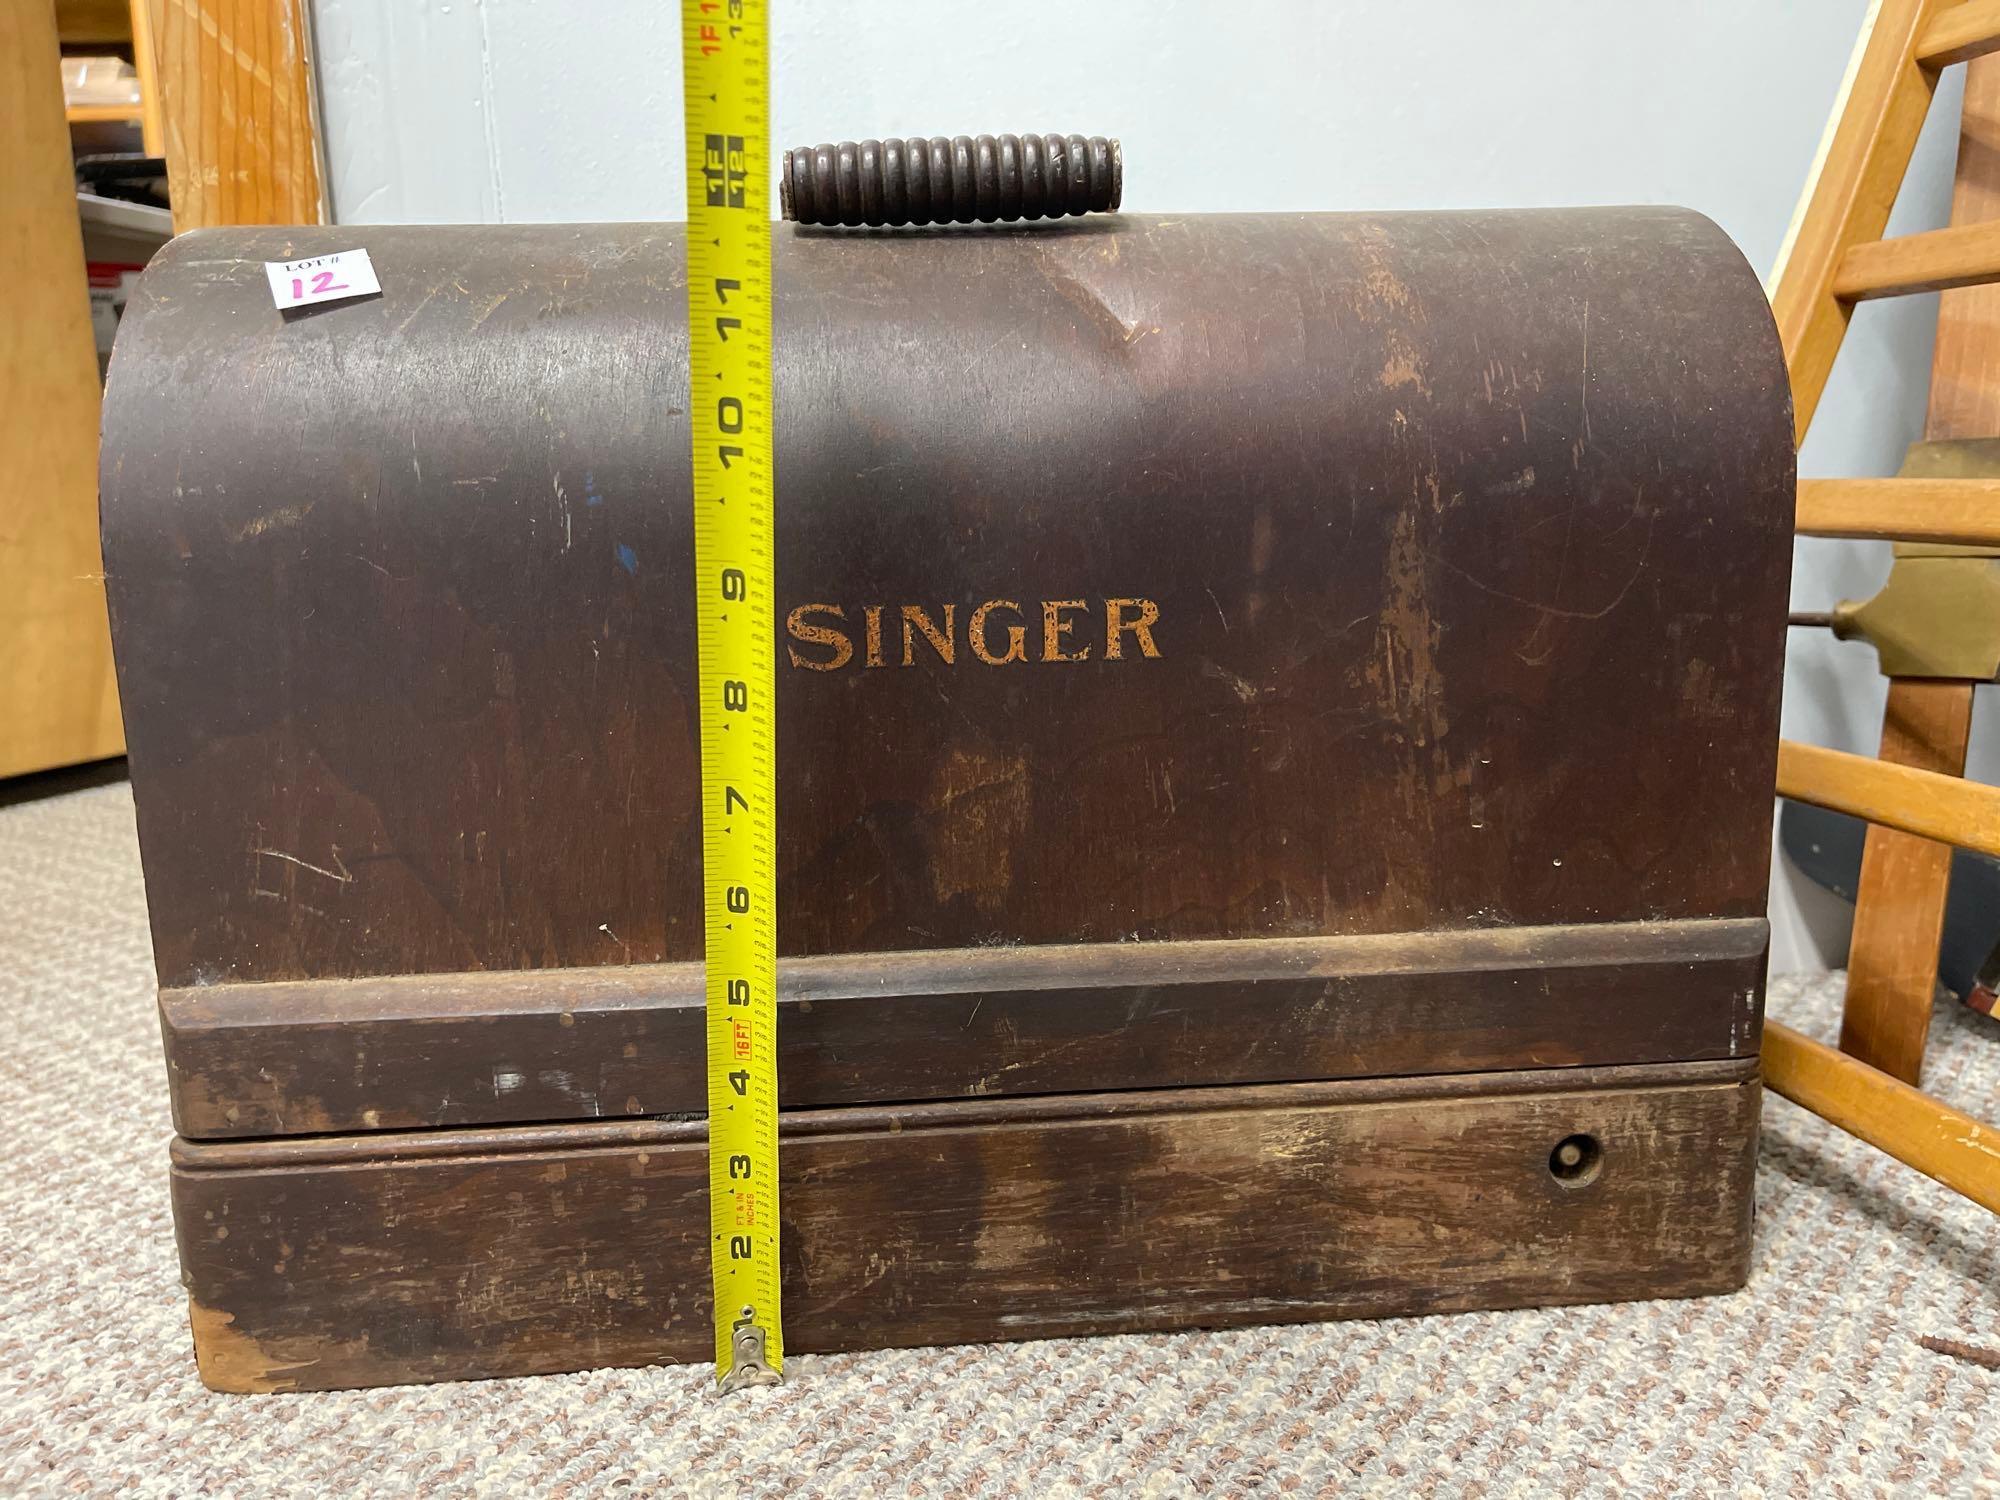 VINTAGE SINGER PORTABLE SEWING MACHINE. UNOPENED, NO KEY HEAVY. UNKNOWN MODEL INSIDE